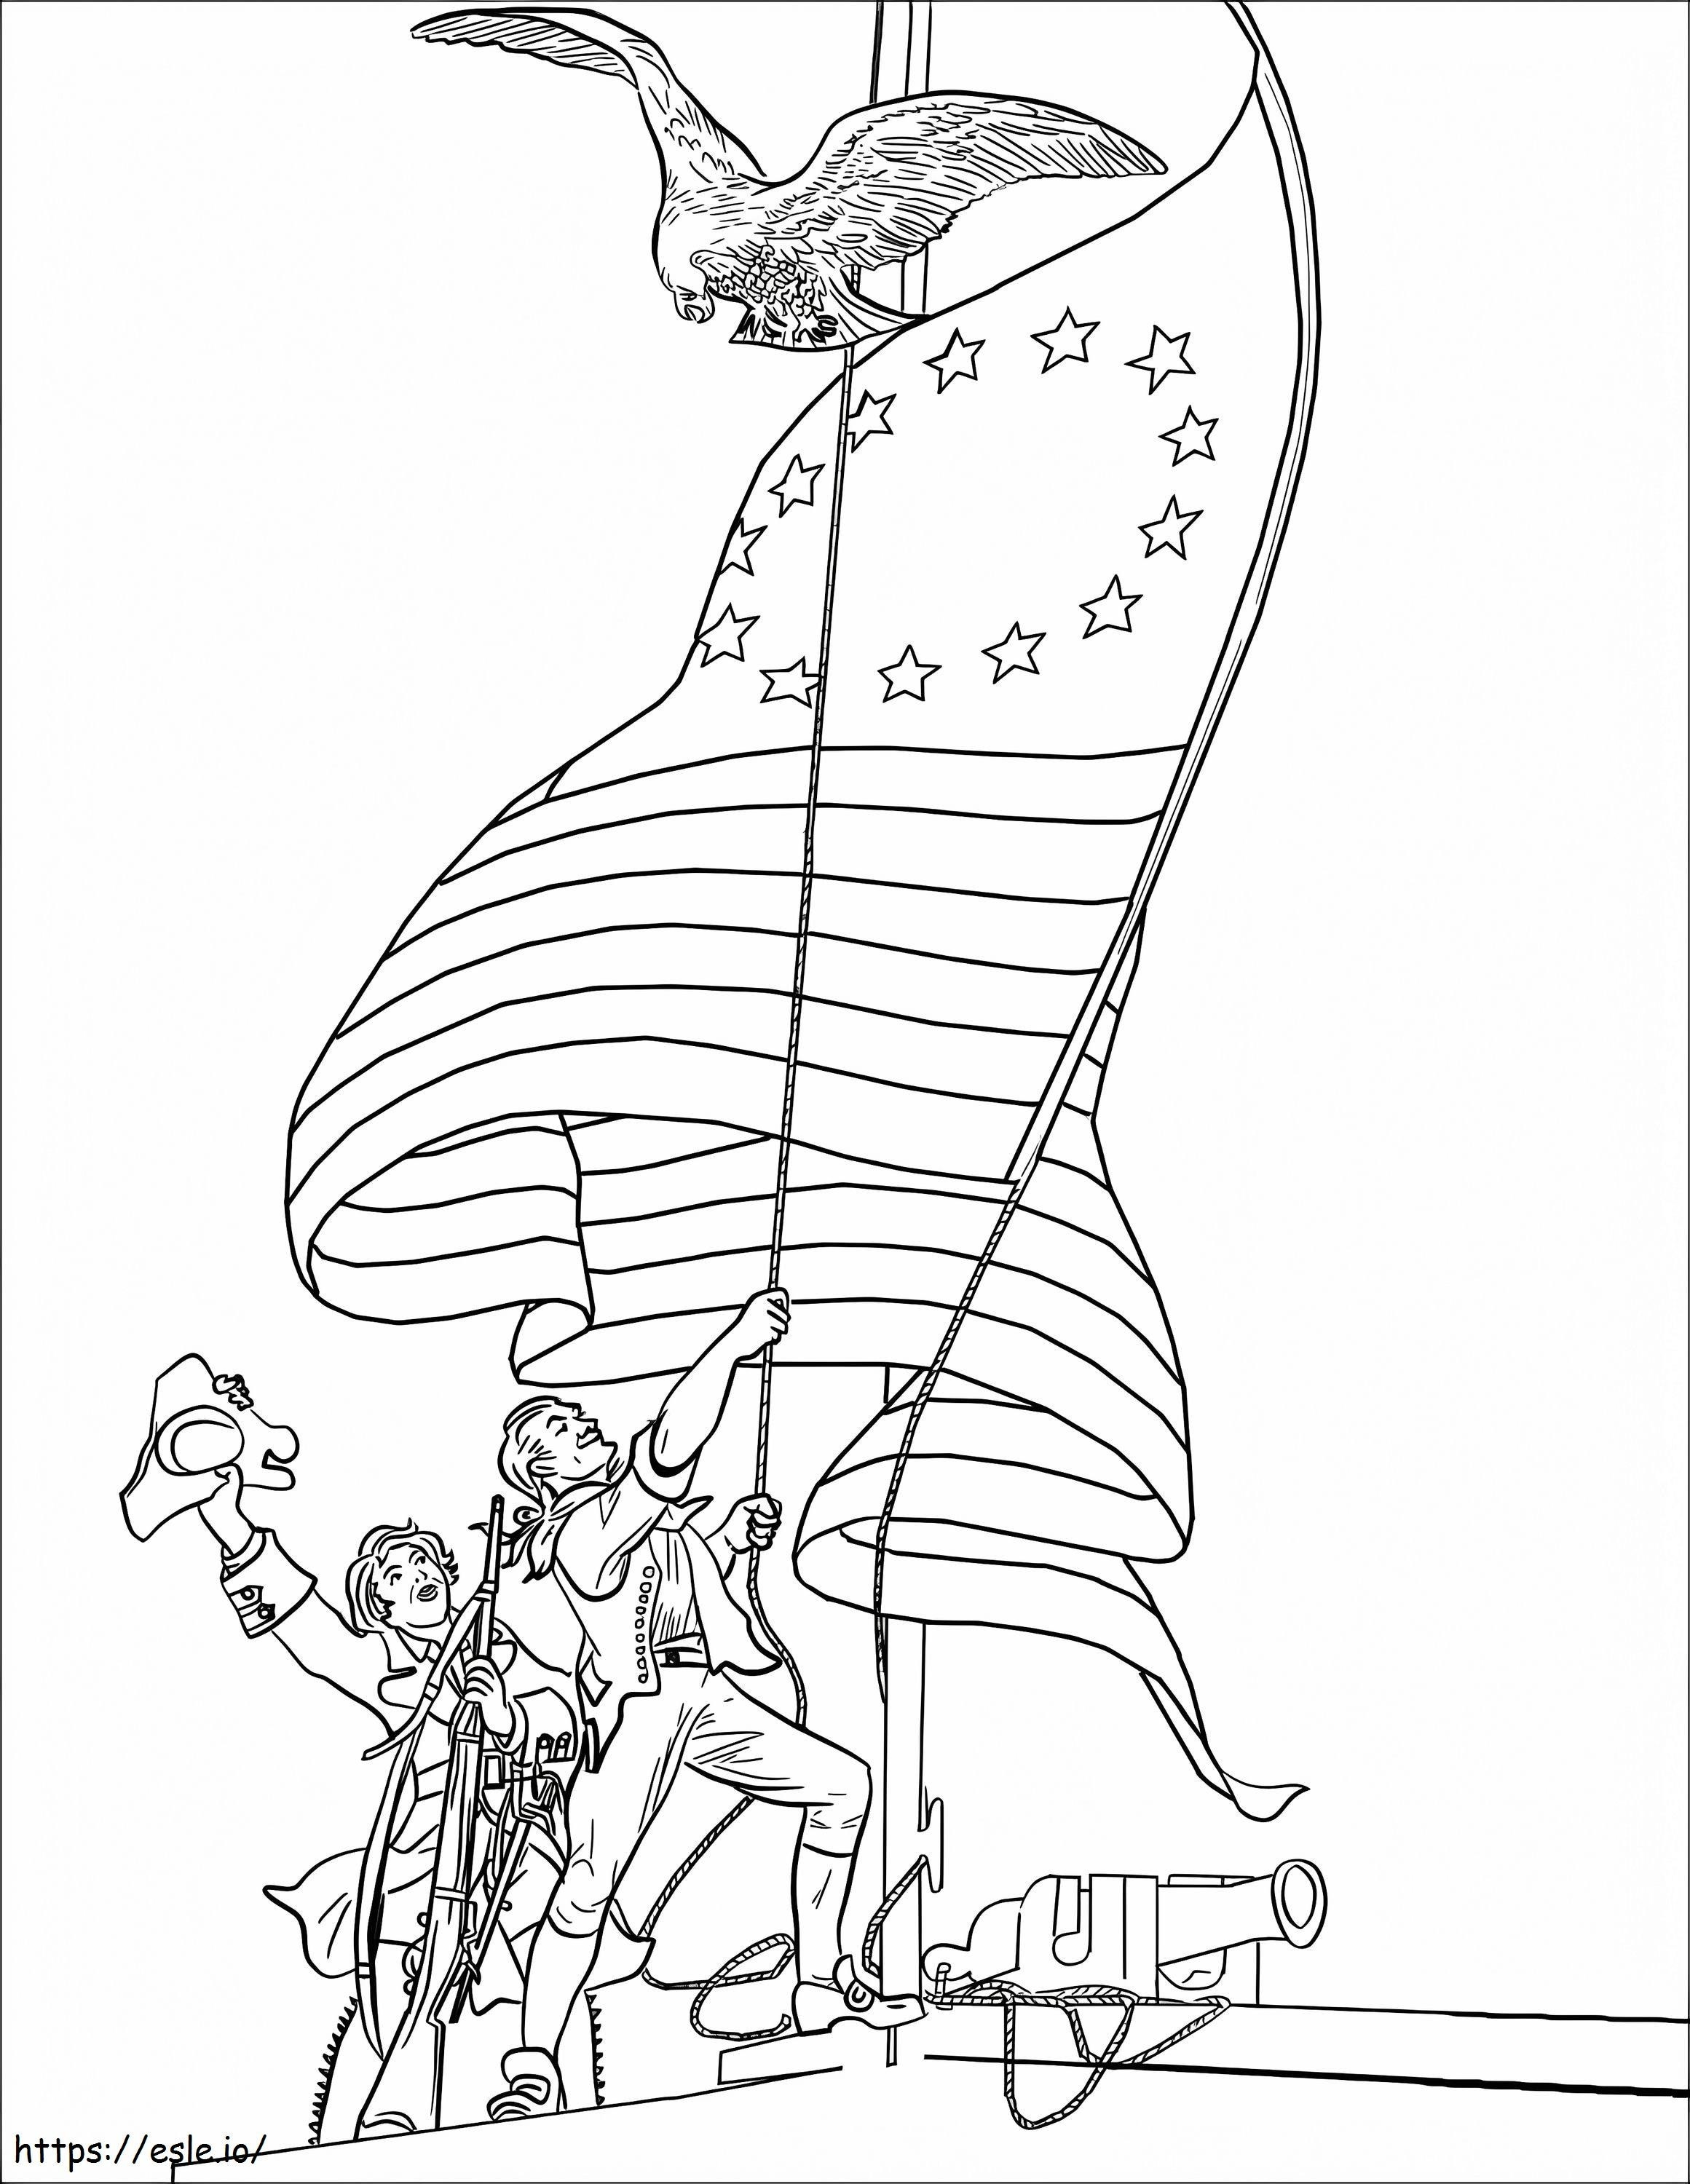 Patriots Raising An American Flag coloring page